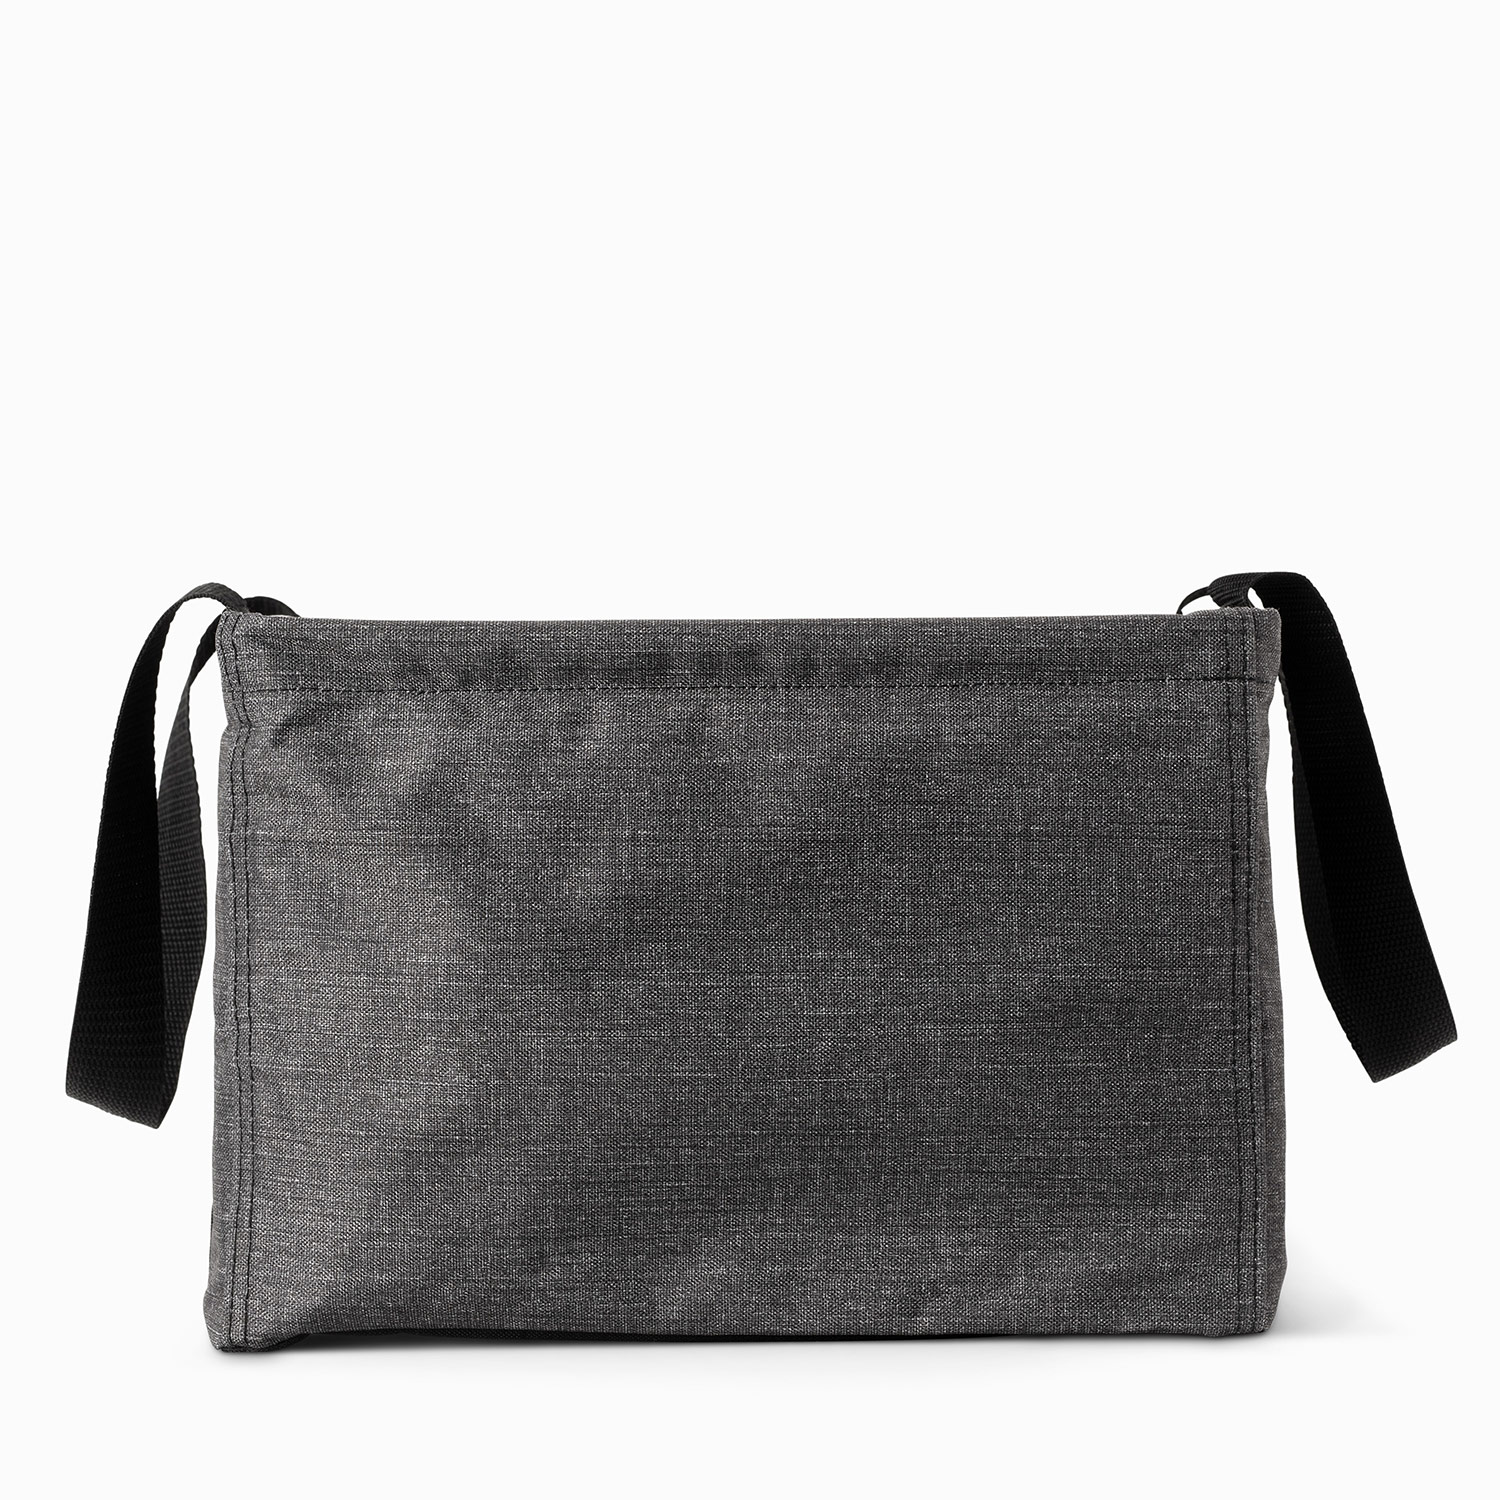 Charcoal Crosshatch - Square Utility Tote - Thirty-One Gifts - Affordable  Purses, Totes & Bags